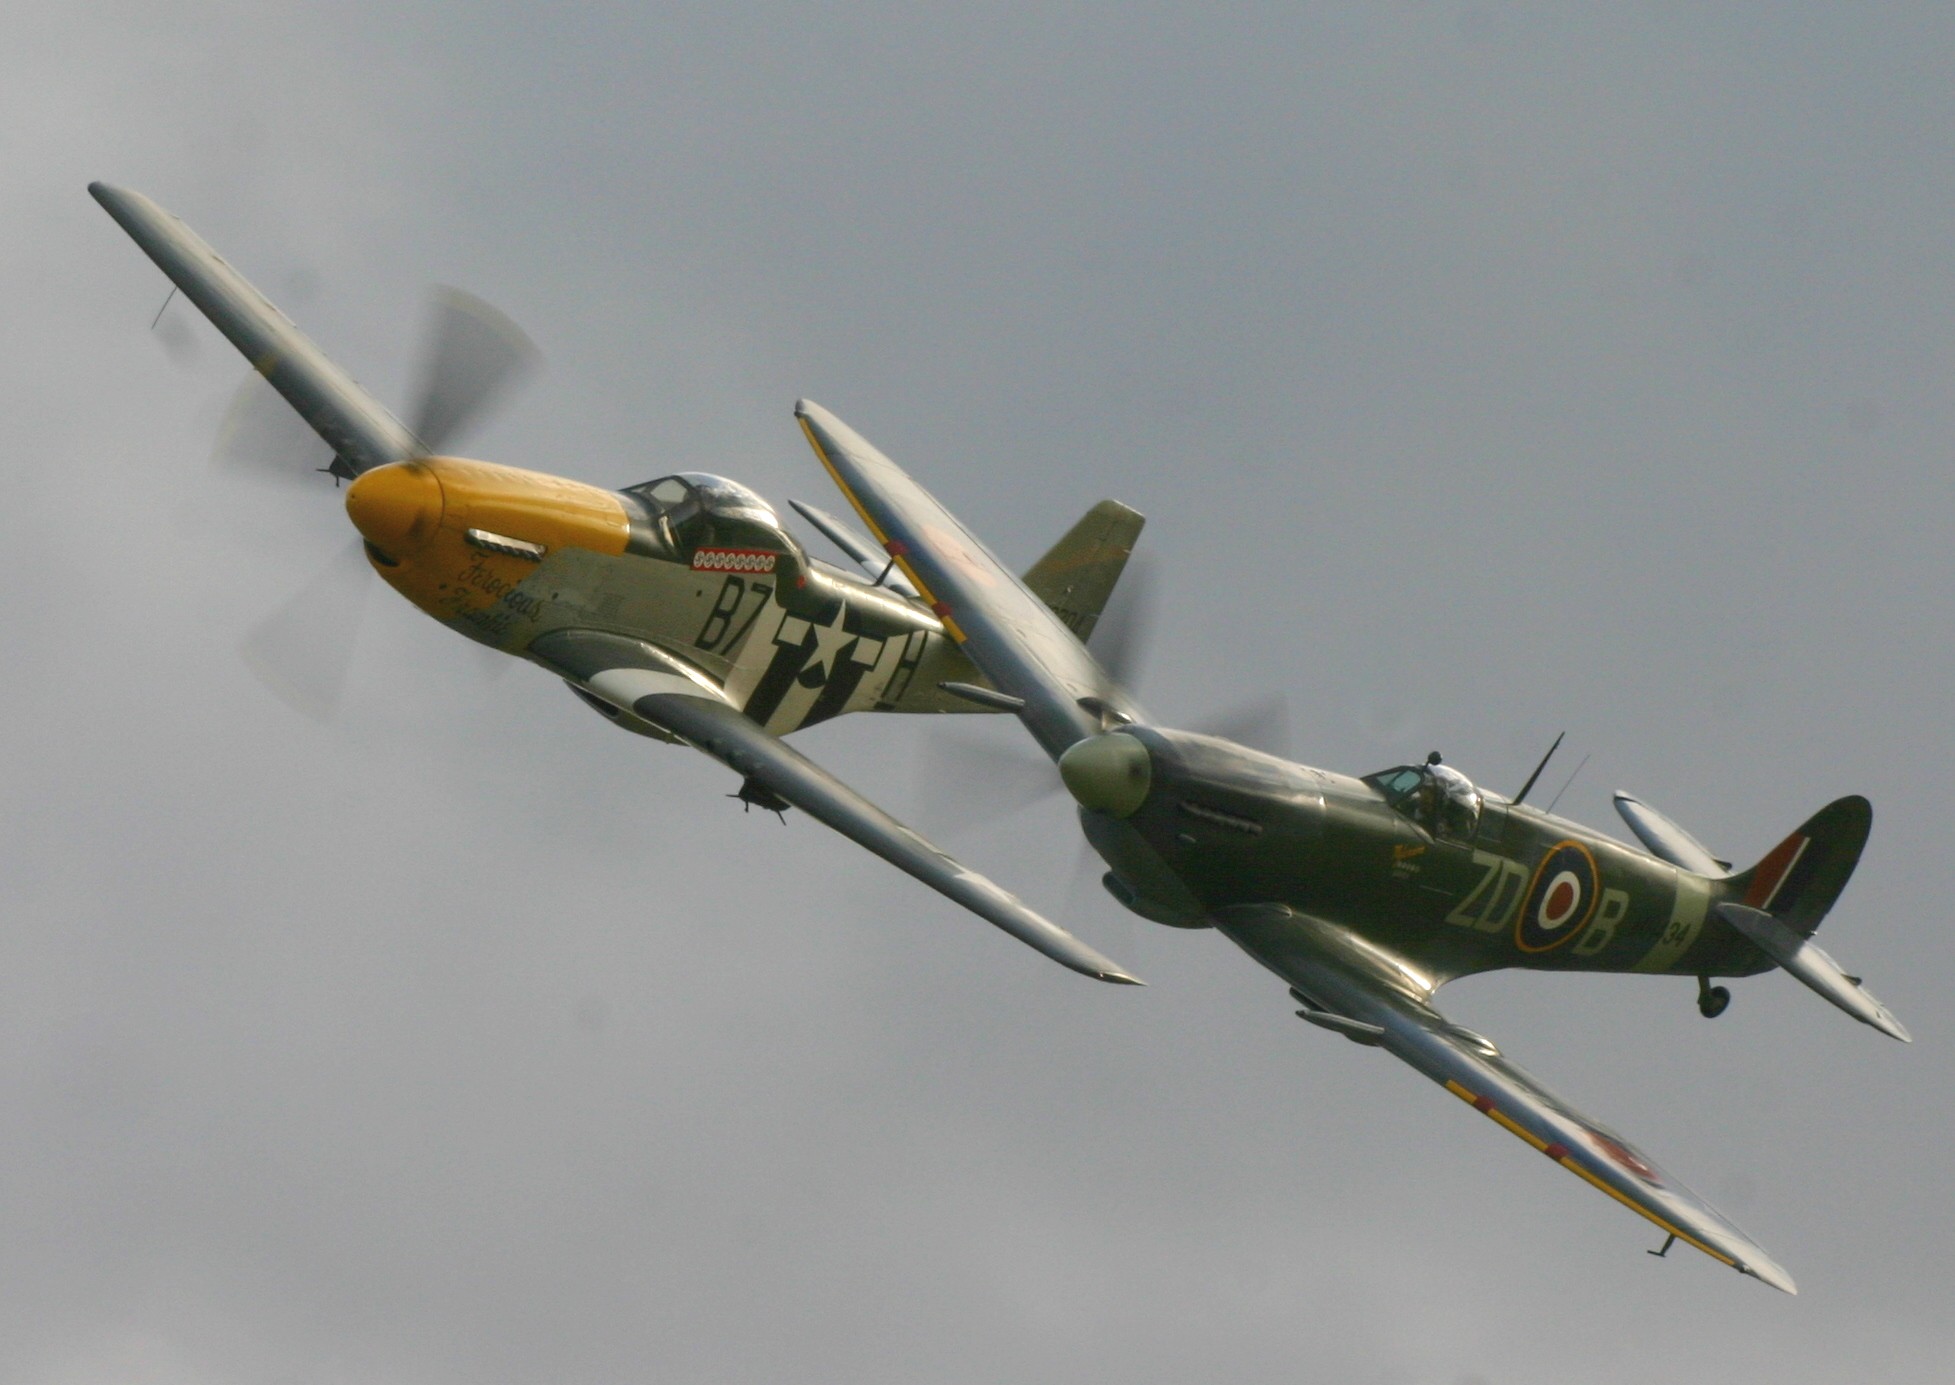 P51 Frankie And Spitfire Mh434 By Sceptre63